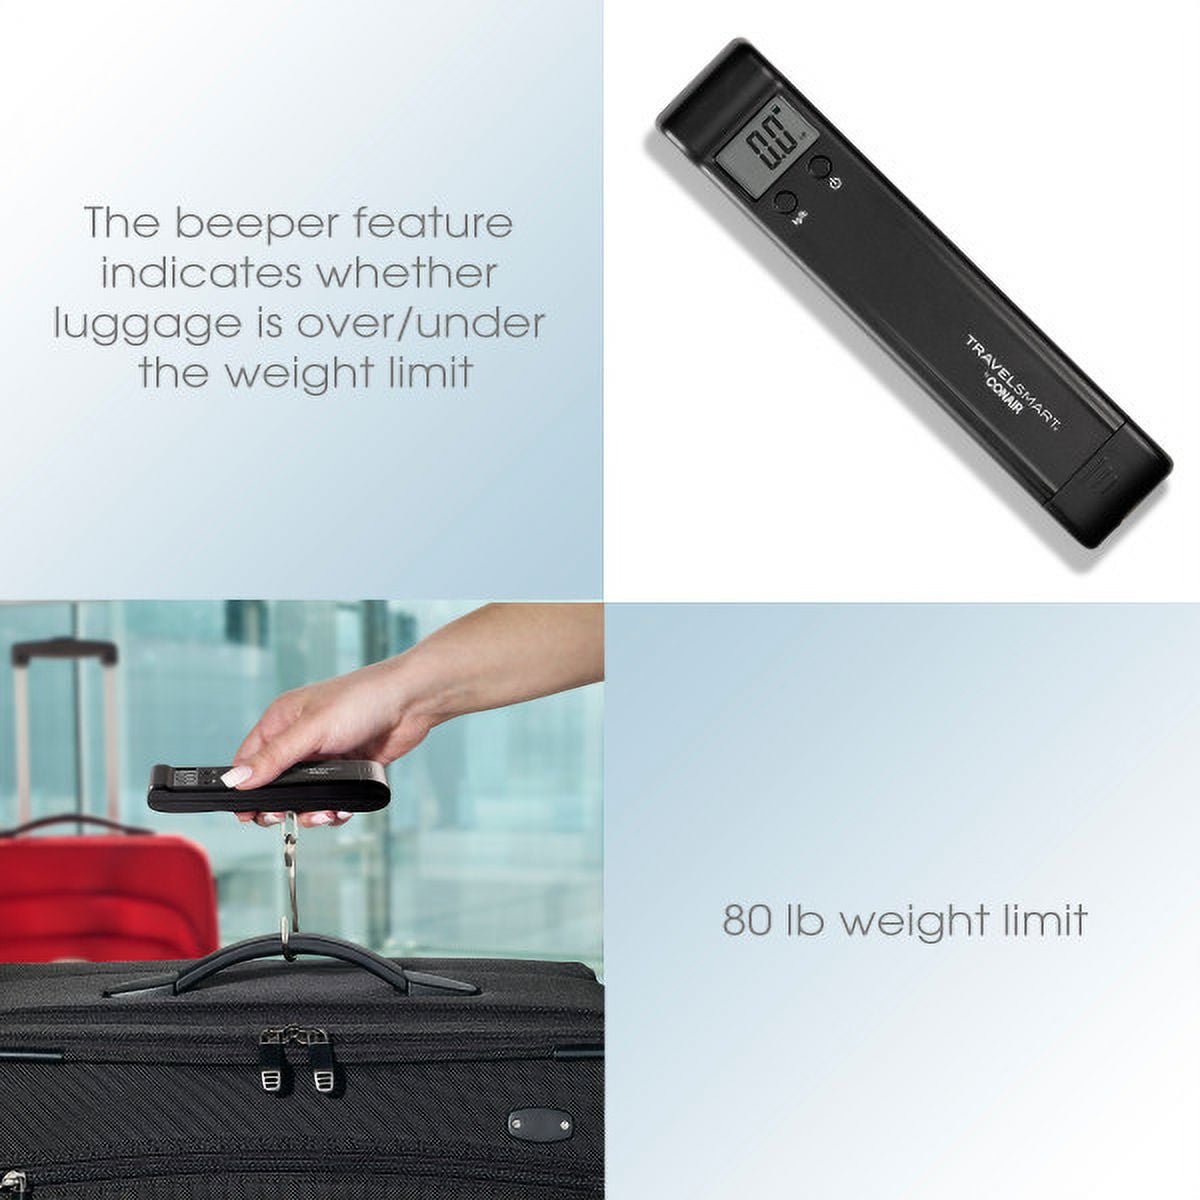 SideDeal: 2-Pack: TravelSmart by Conair Digital Luggage Scale